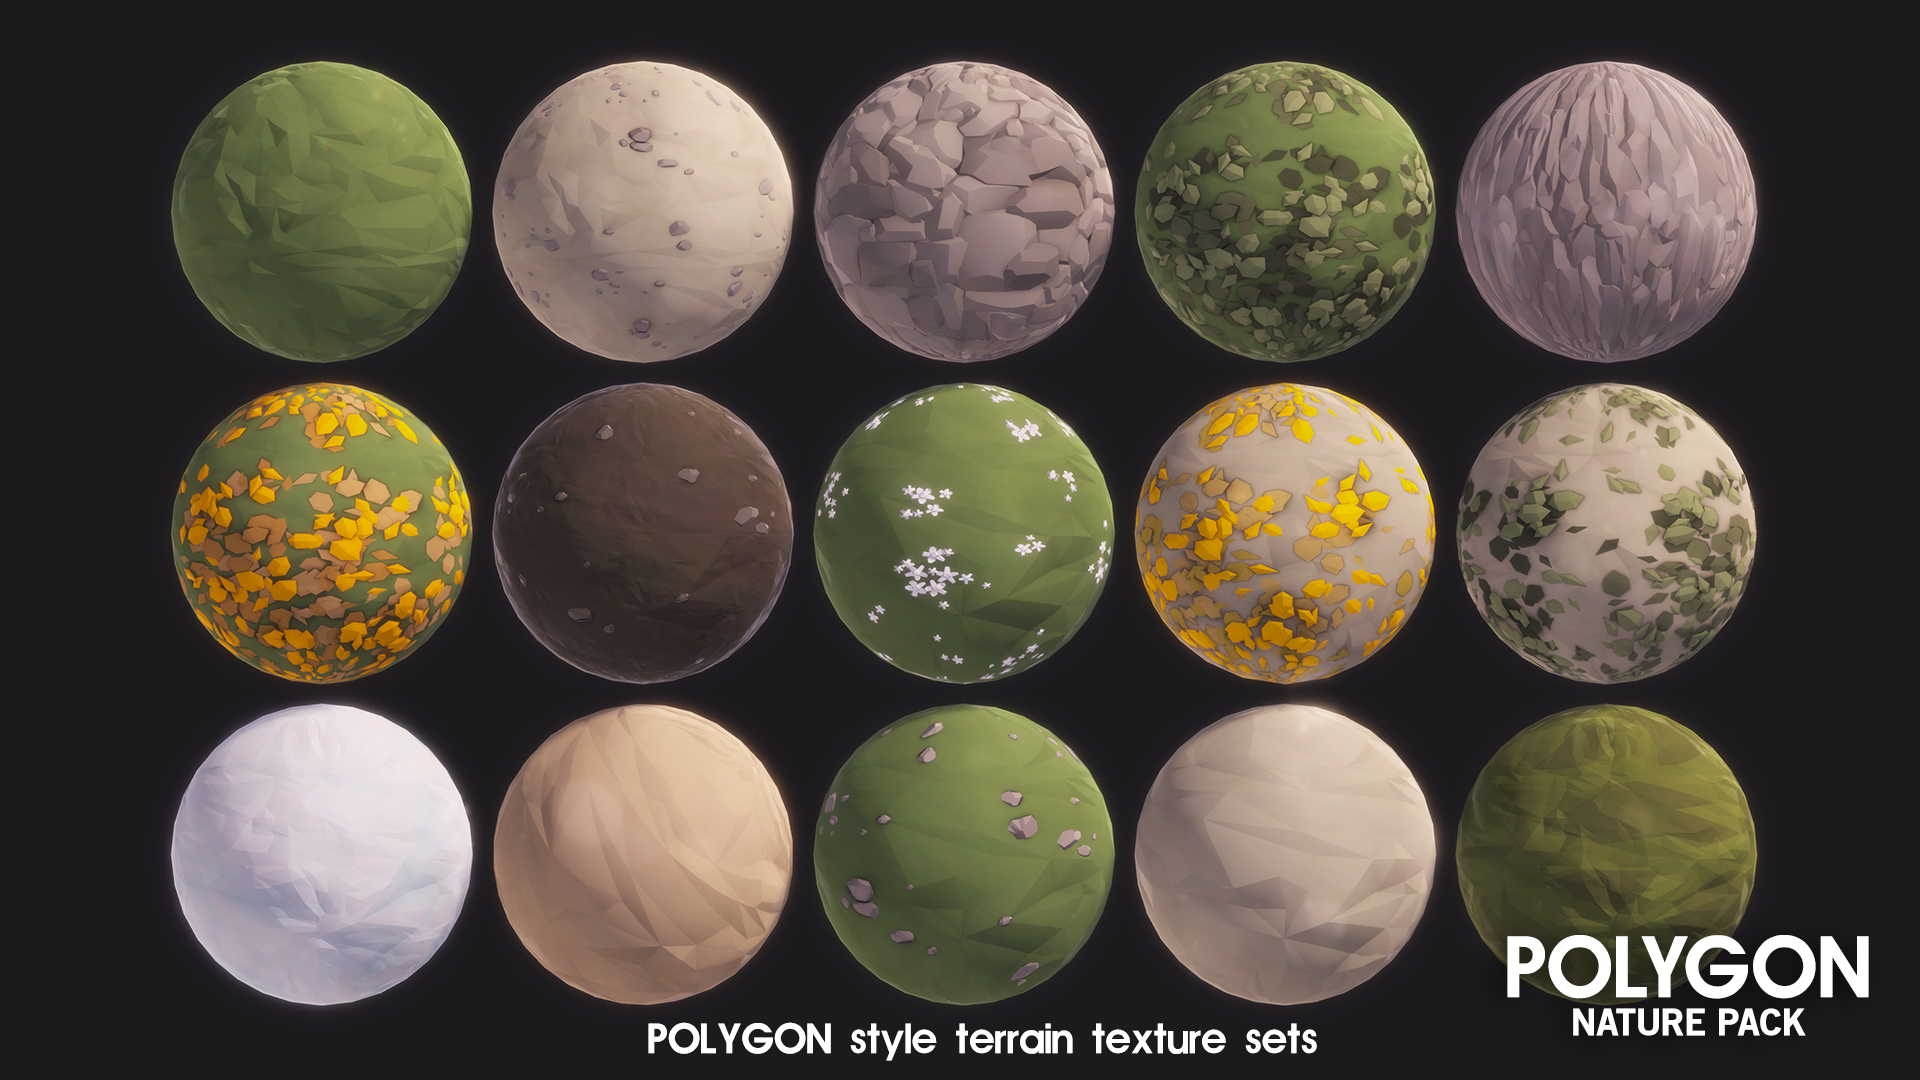 POLYGON - Nature Pack - Synty Studios - Unity and Unreal 3D low poly assets for game development